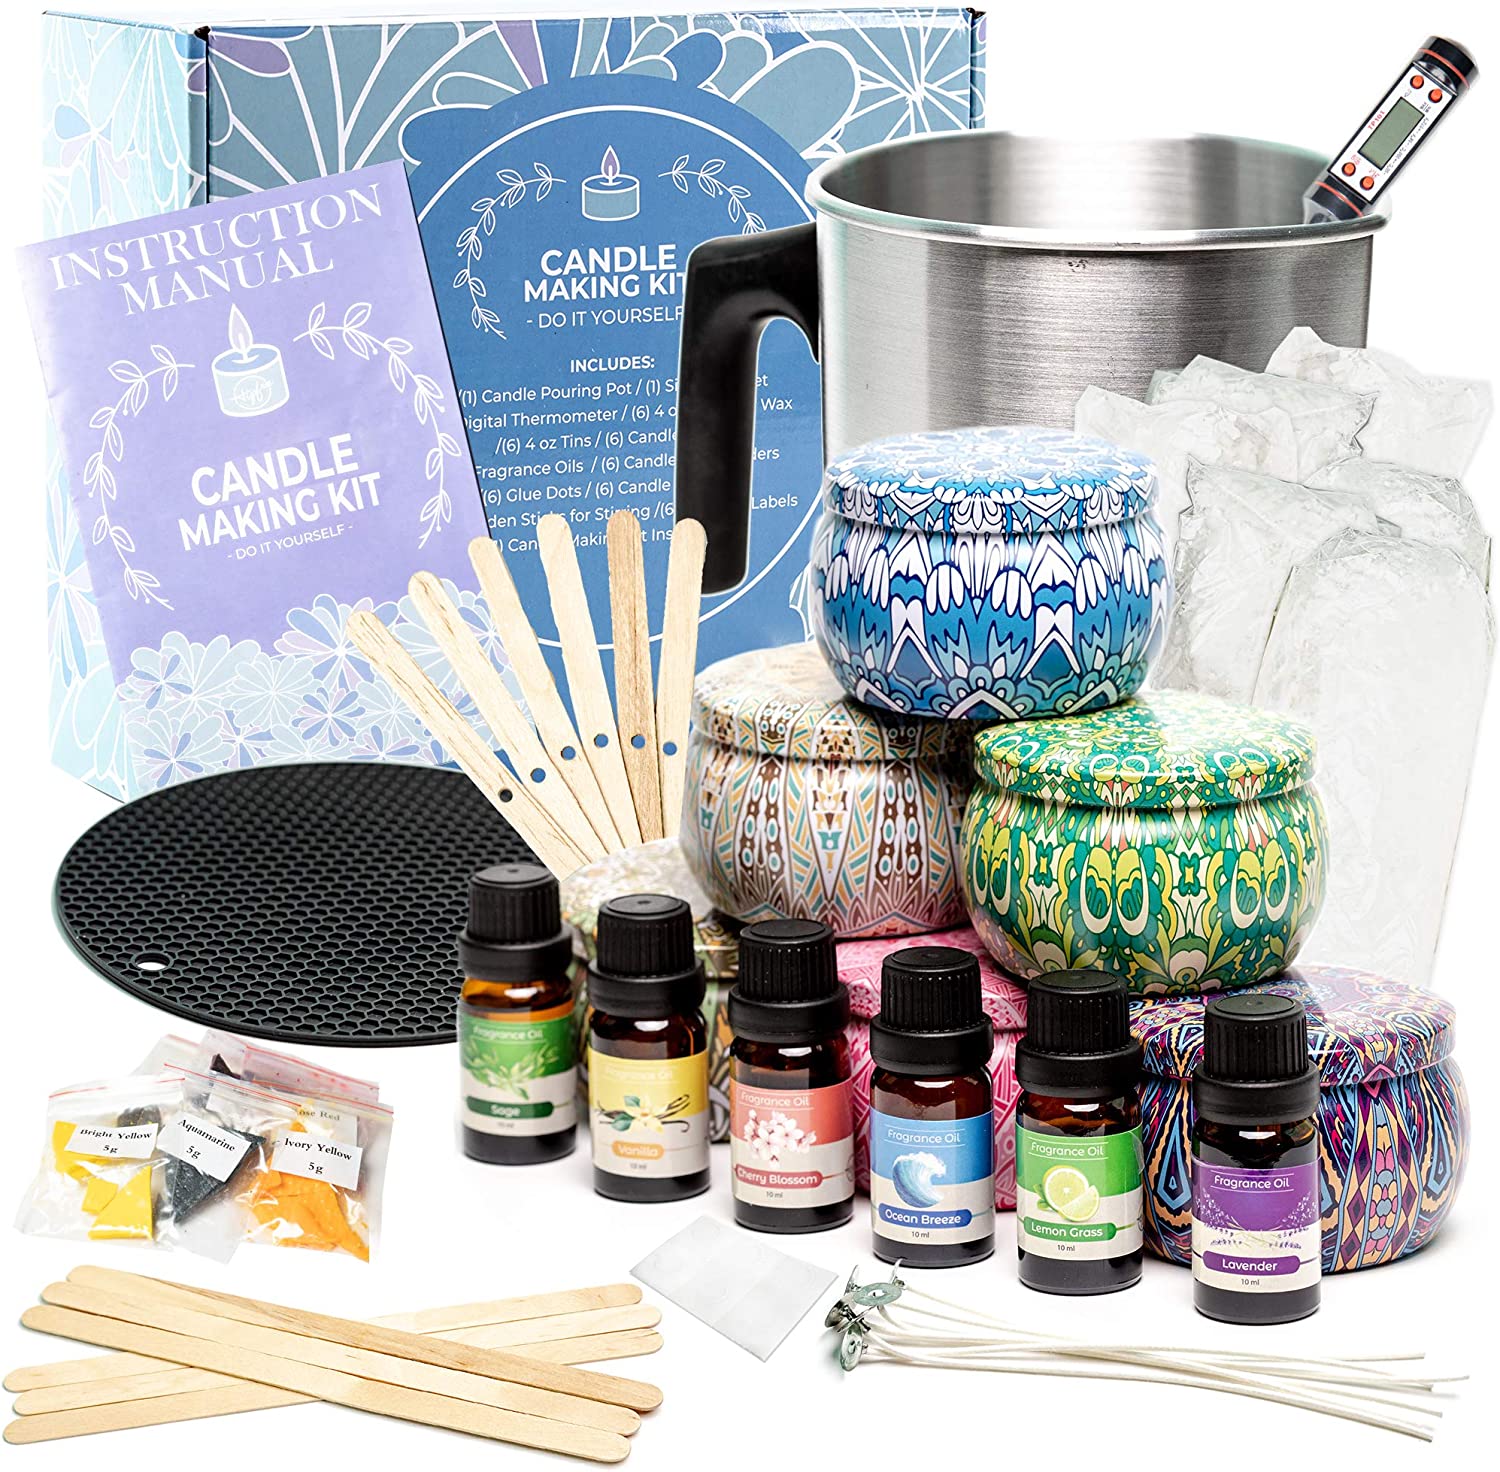 Candle Making Kit – Soy Candle Making Kits for Adults Beginners – Candle Making Supplies – Candle Pouring Pot, Soy Wax, Candle Wicks, 6 Fragrance Oil for Candle Making – Arts and Crafts for Adults